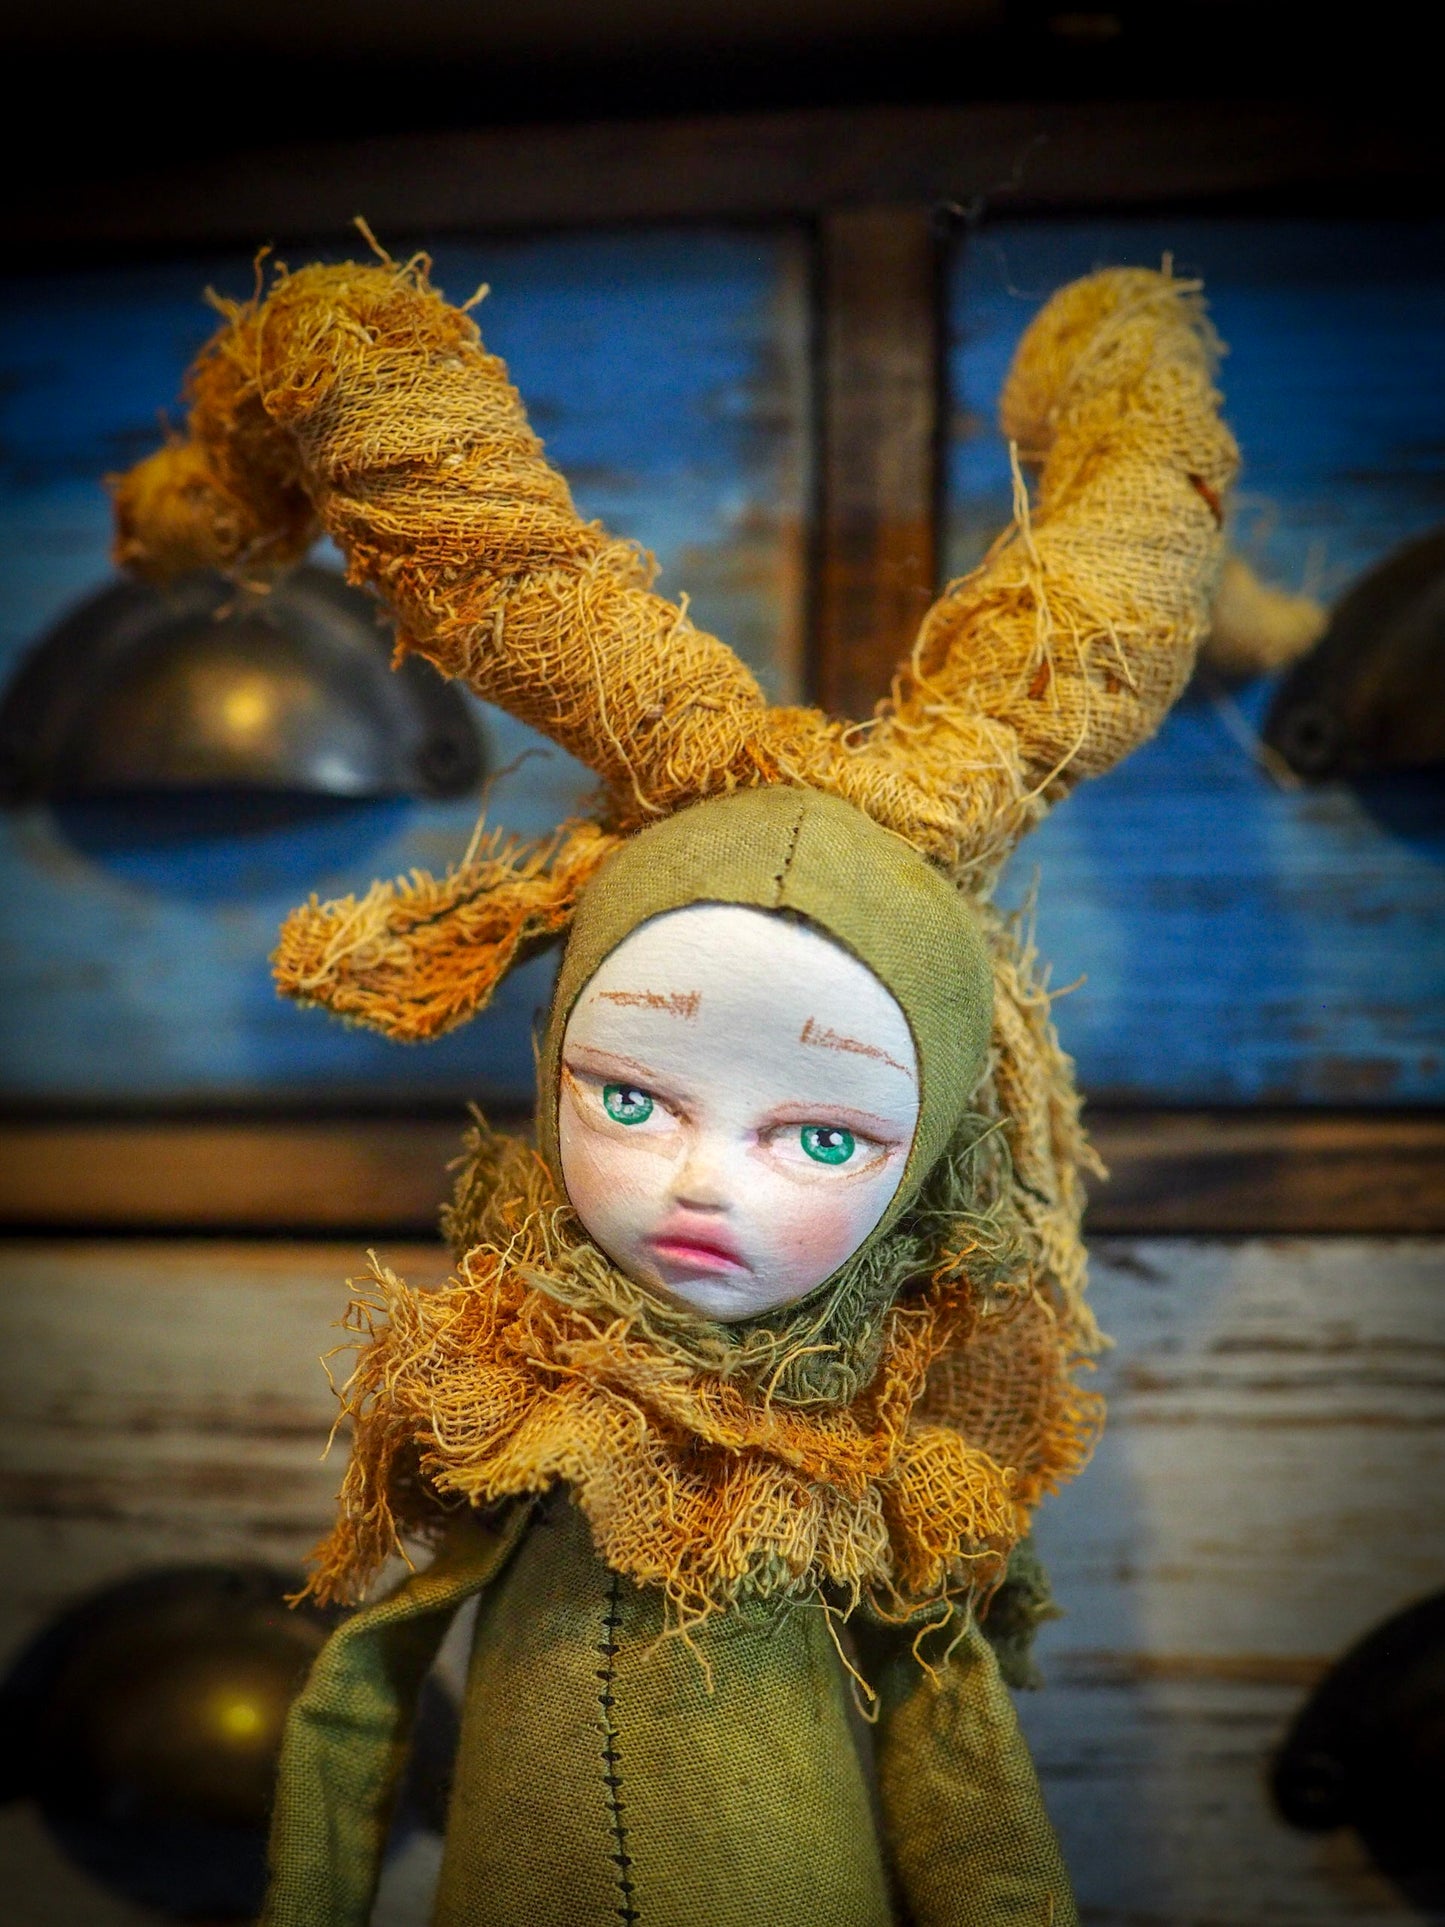 THE FAUN - An original handmade doll by Danita Art, made with original patterns, organic fabric dyed using only natural ingredients like avocado peels, walnuts and marigolds. Each mini art doll in this toy collection is a mini work of huggable fabric art to be treasured by any collector of Danita's melancholic and fantastic work.